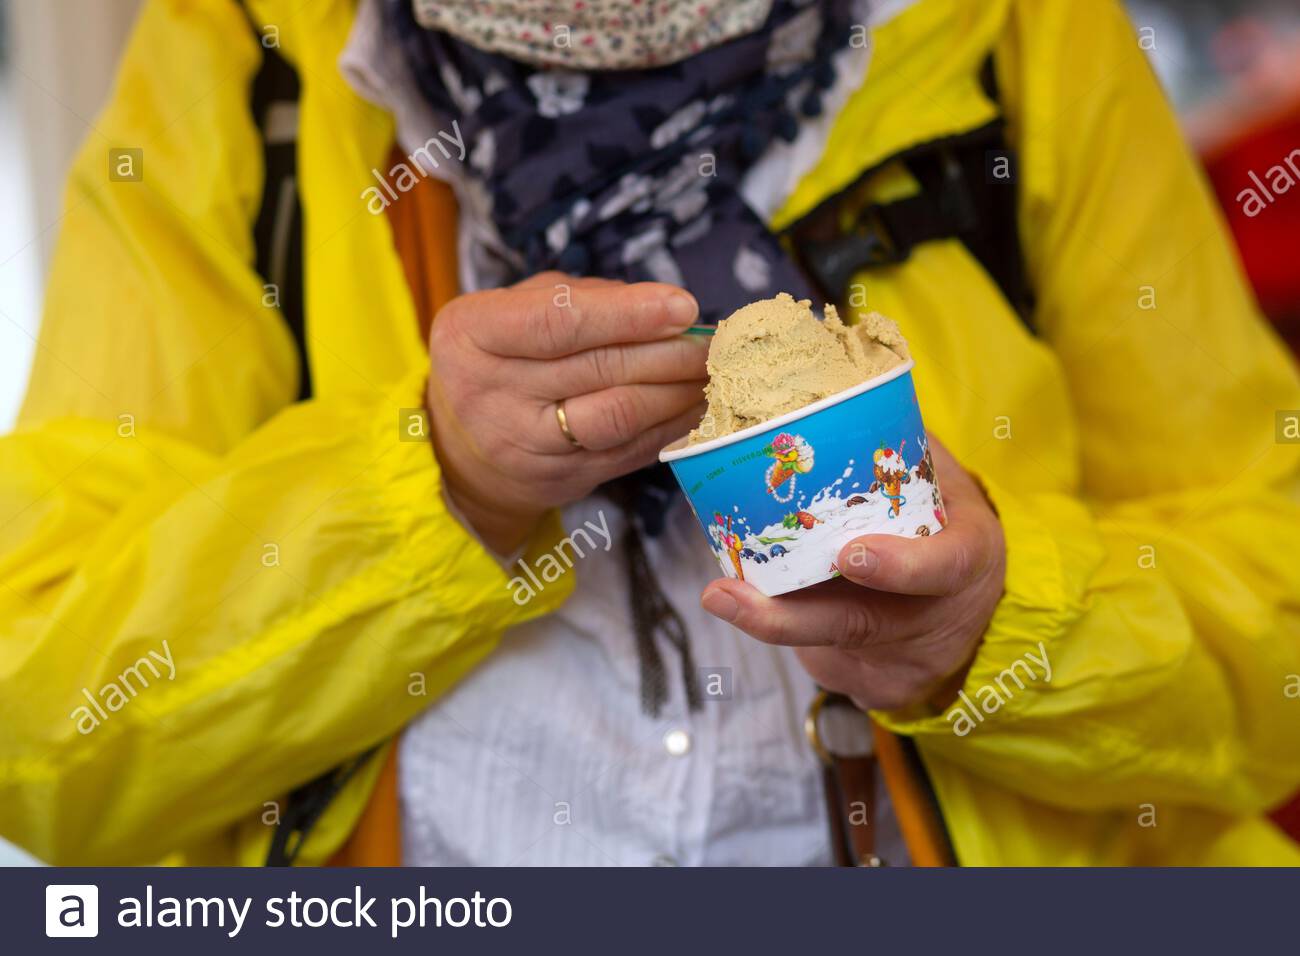 A woman in a yellow rain jacket eats from a tub of ice-cream in Weimar, Germany Stock Photo